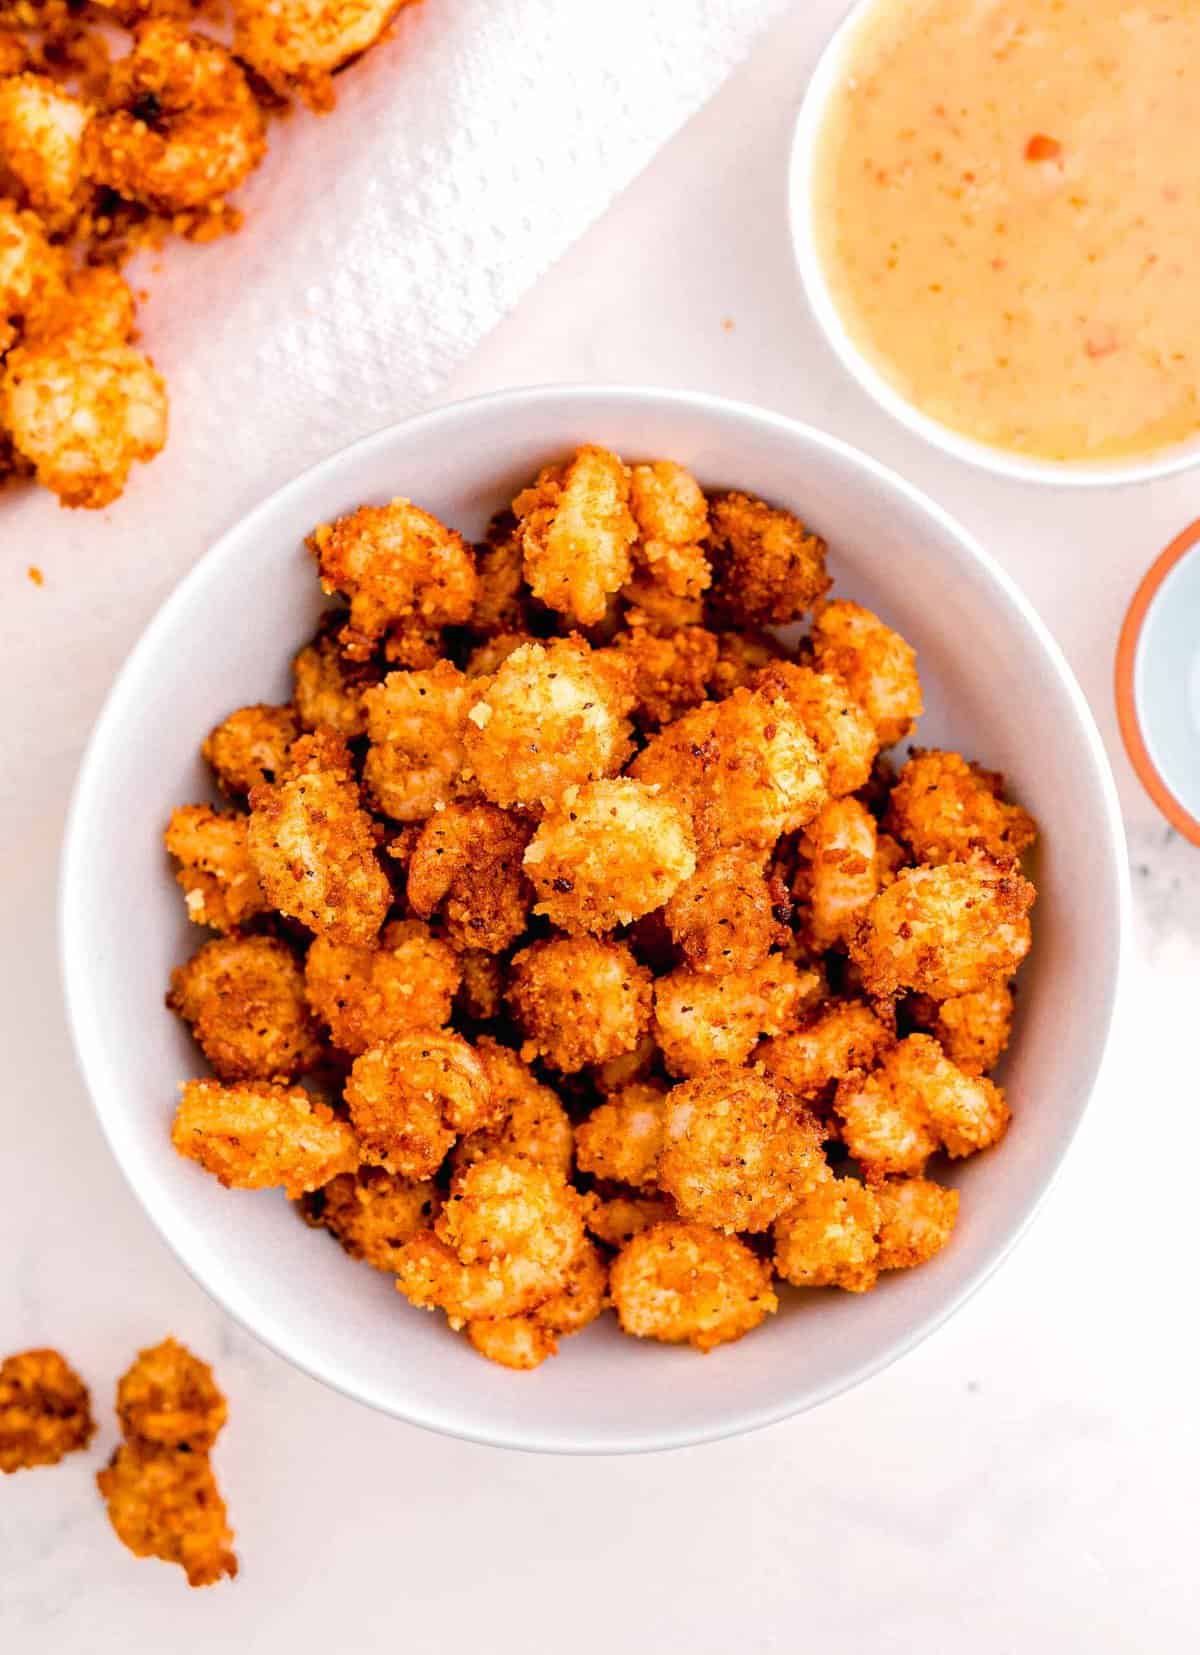 the fried shrimp in a large white bowl next to the mayo mixture